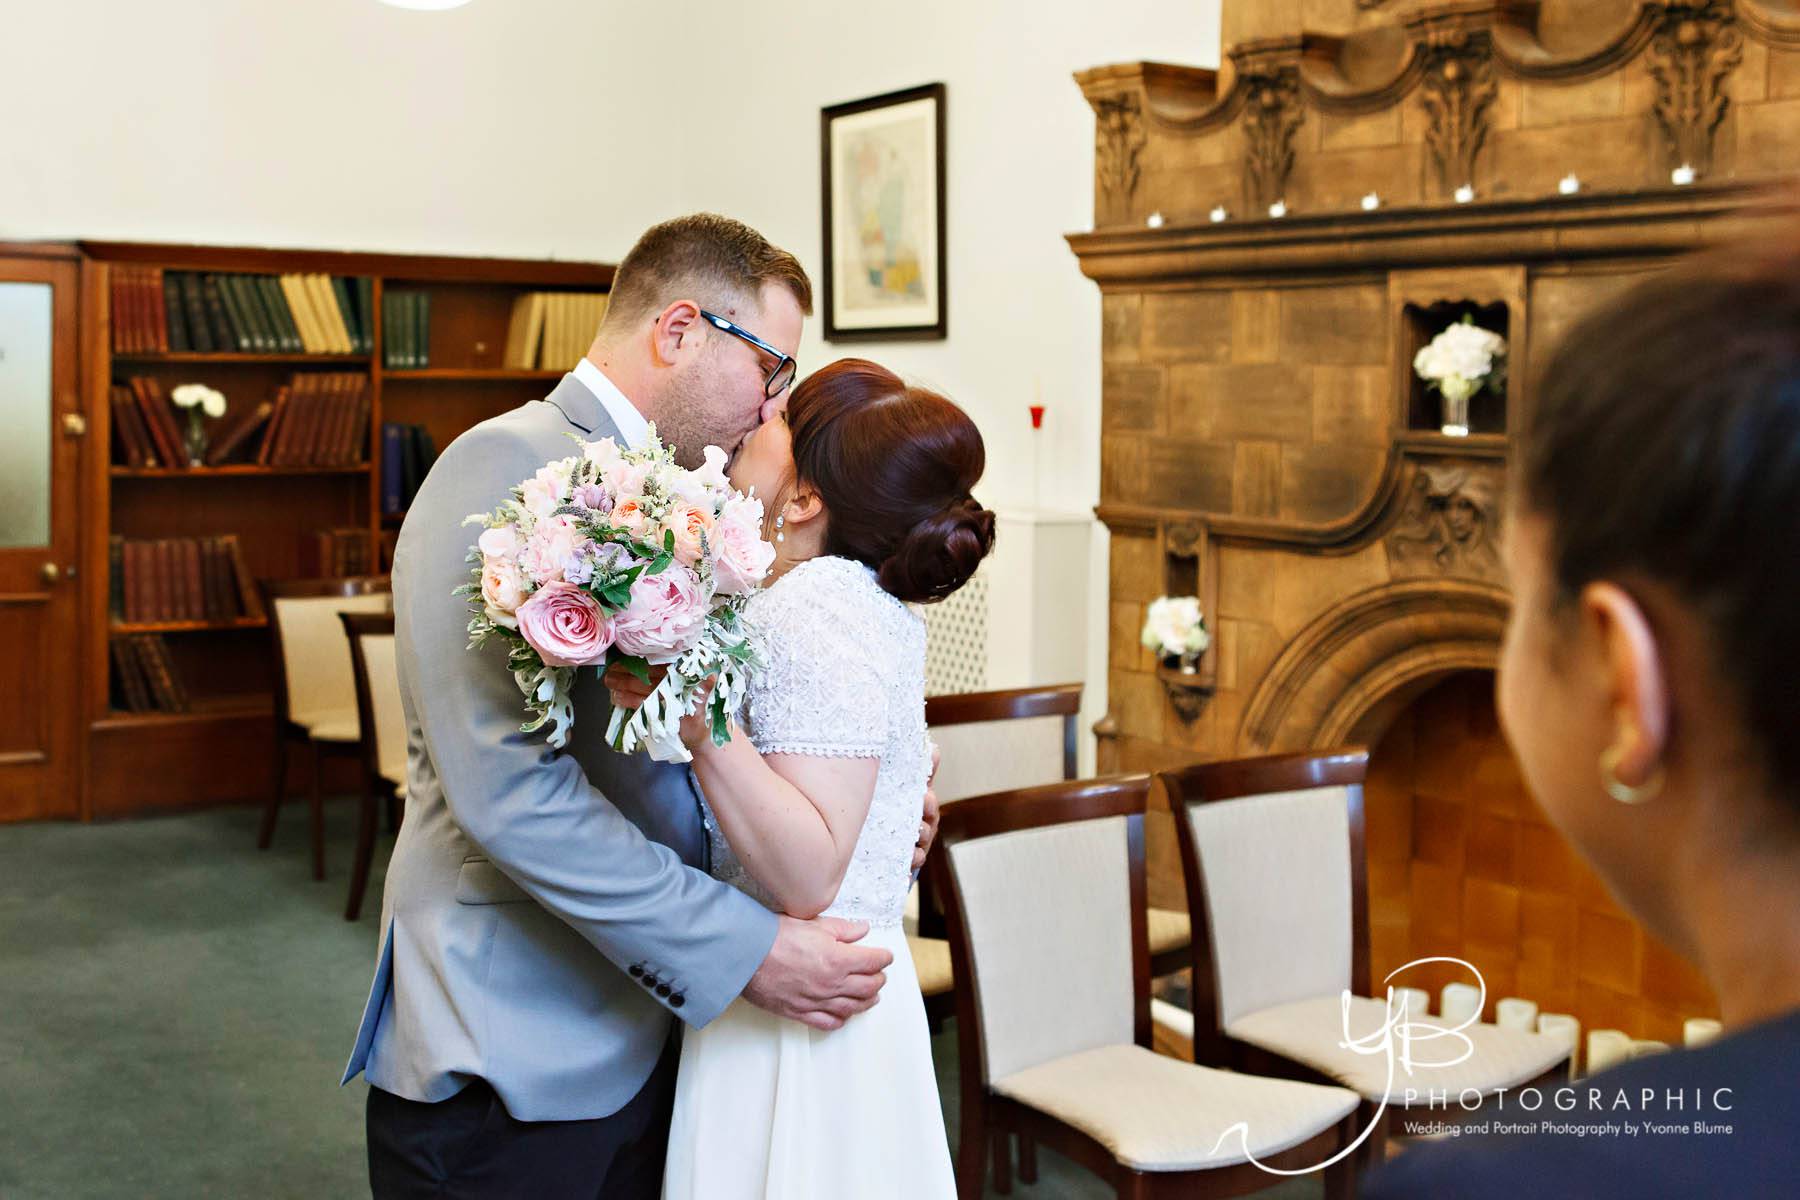 Wedding Photography at Mayfair Library by YBPHOTOGRAPHIC